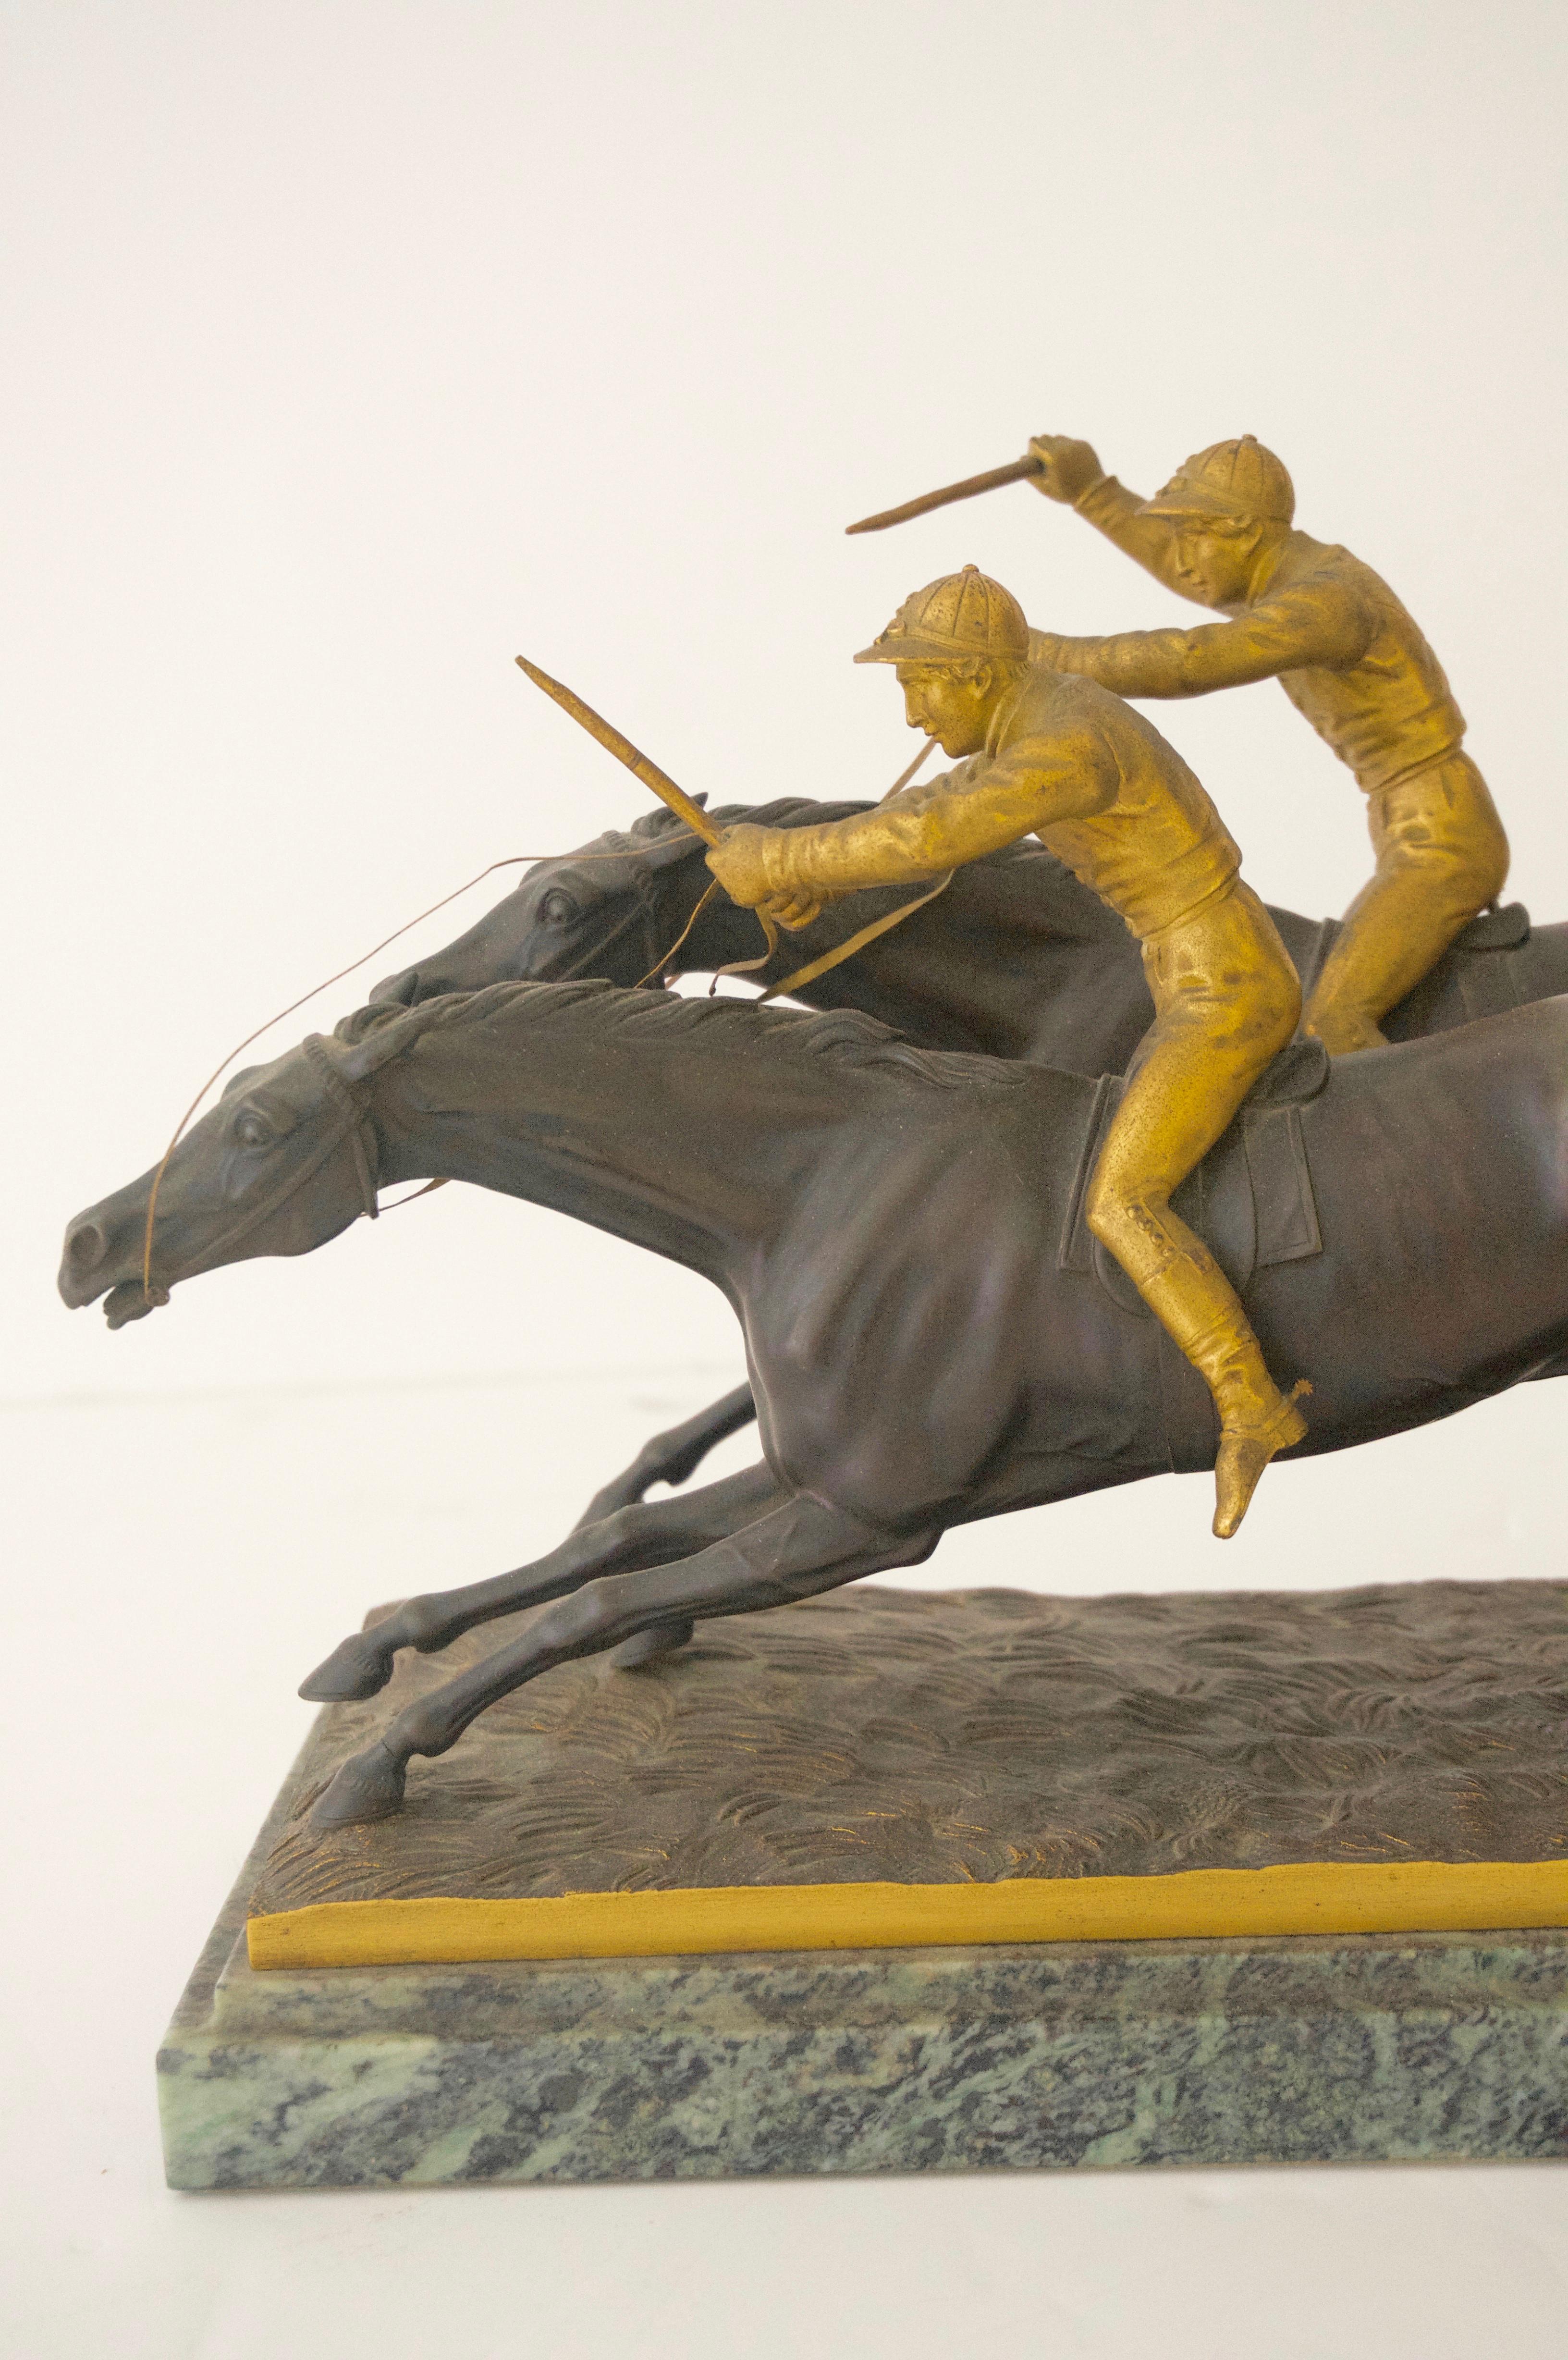 This classic and styish Edwardian sculpture depicts the climactic moment of the finish-line as the horses are neck and neck...

 The dark bronze of the horses is accented with the gilded bronze jockeys, all of which are mounted on a verdi green